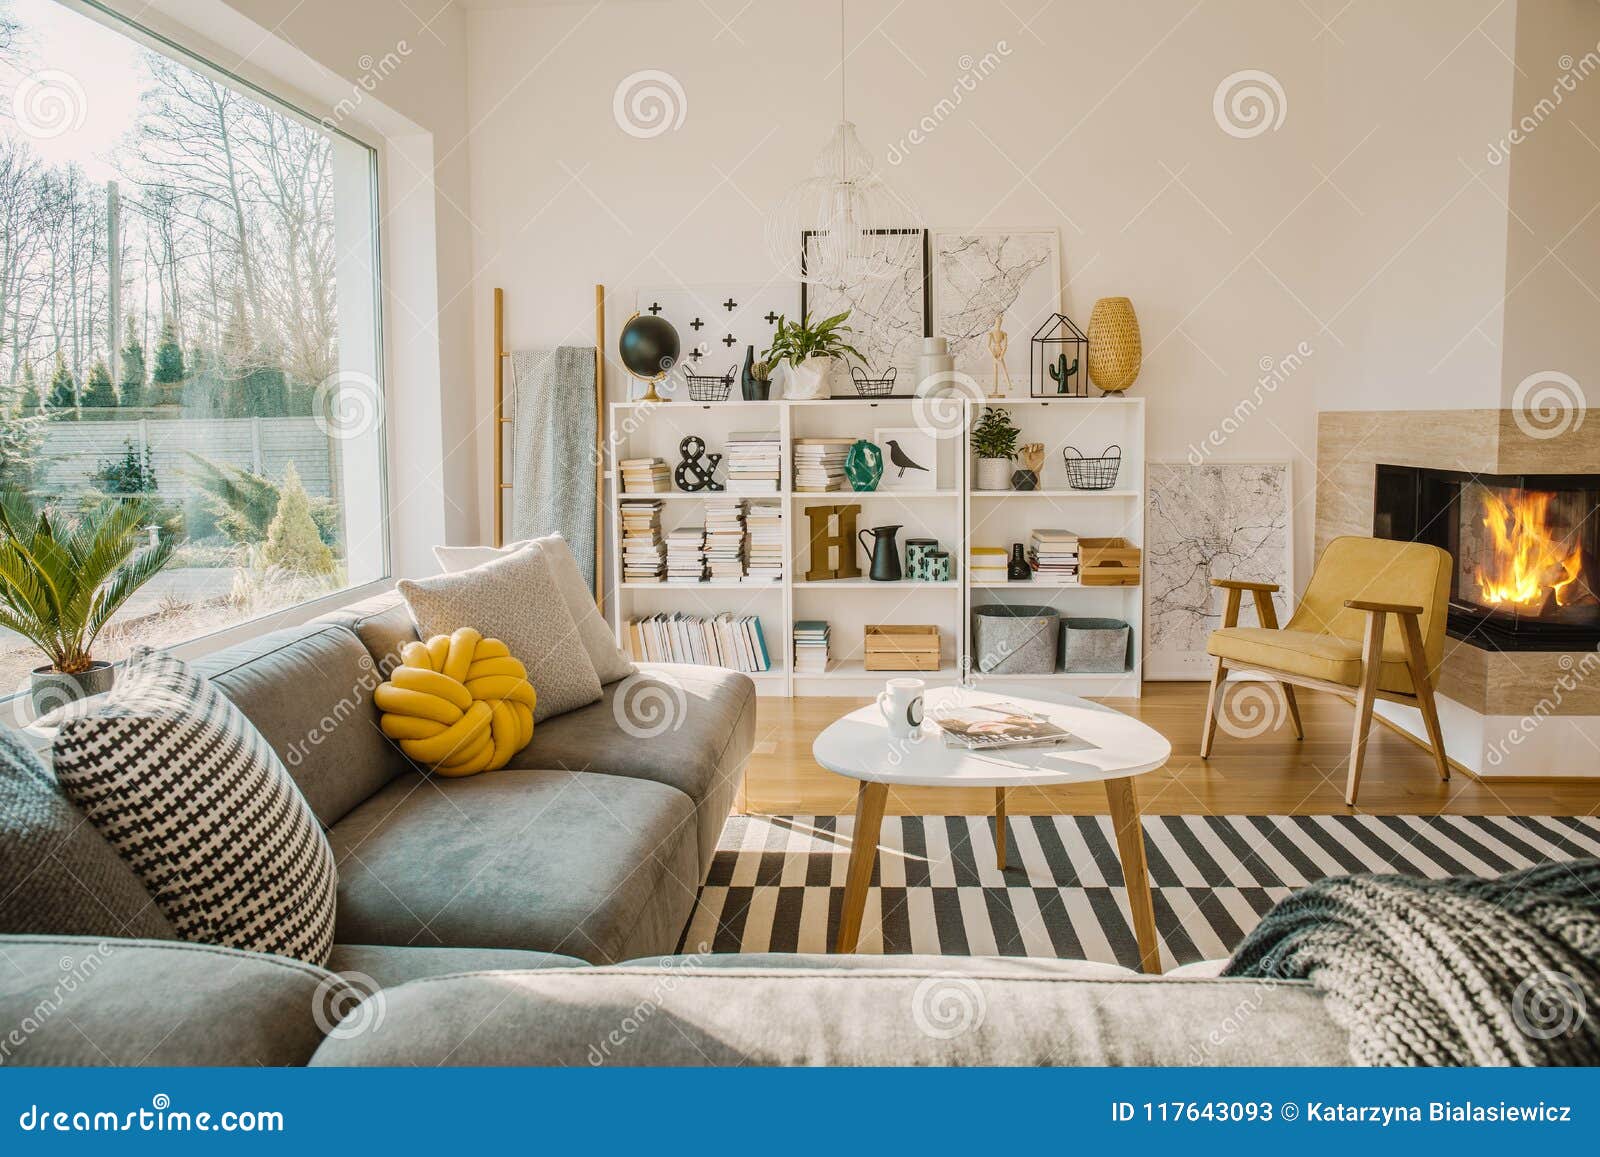 White Wooden Rack With Books Decor Fresh Plants And Simple Posters In Bright Scandinavian Living Room Interior With Stock Image Image Of Interior Modern 117643093,Designs Catalogue Fashionable Latest Blouse Back Neck Designs 2020